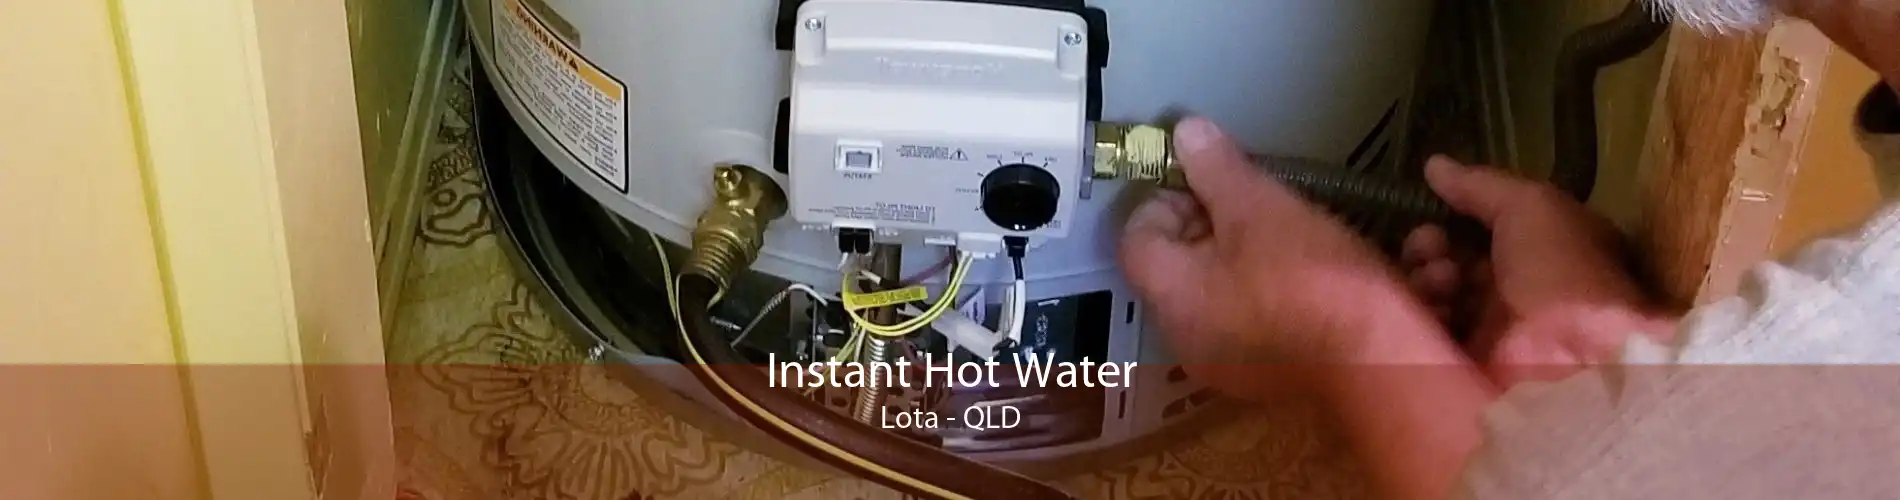 Instant Hot Water Lota - QLD